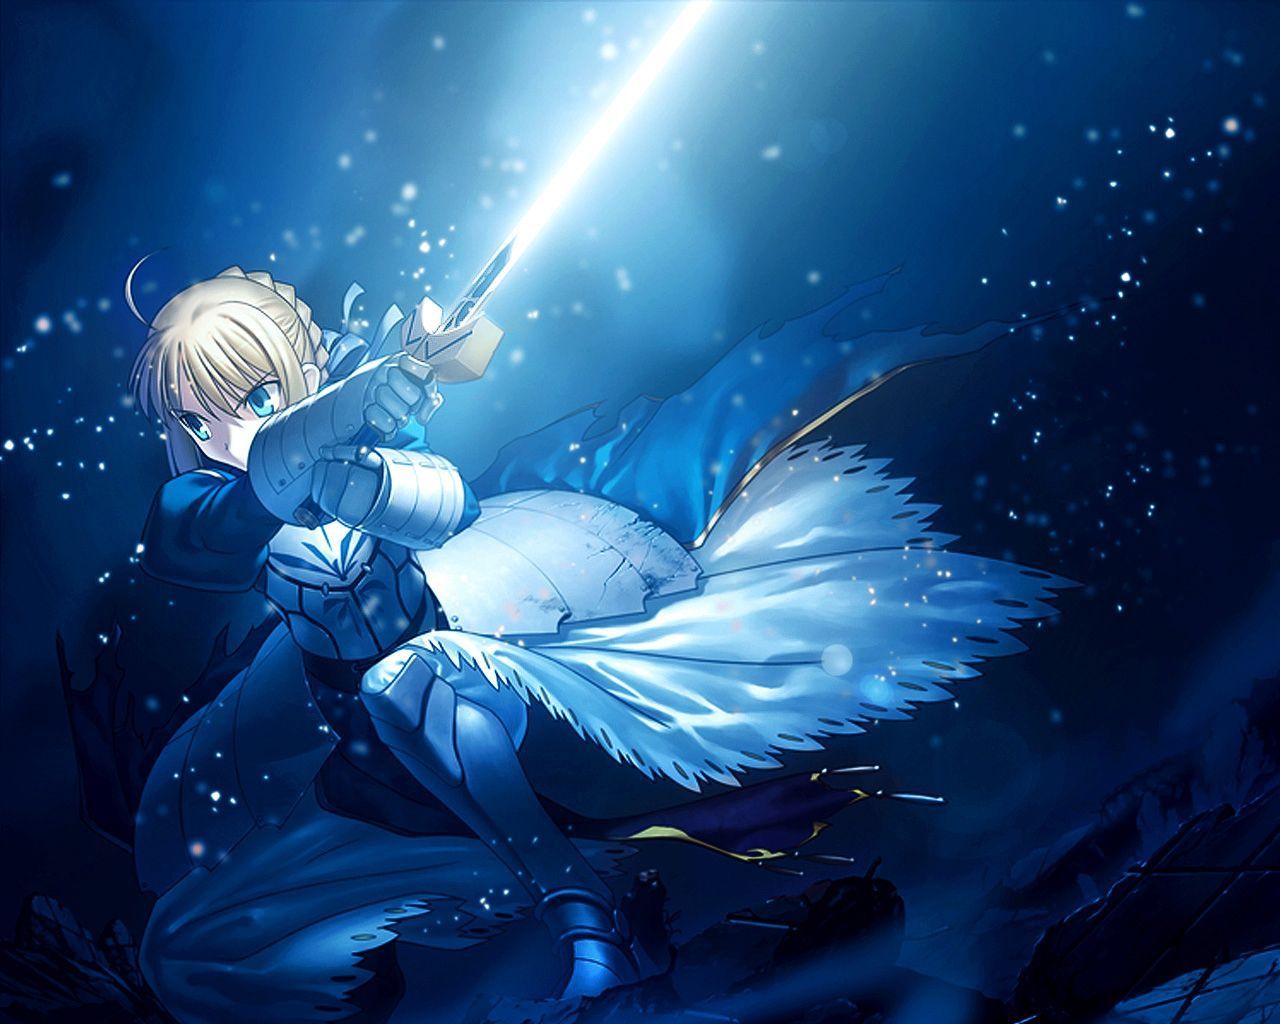 Fate/Stay Night Computer Wallpapers, Desktop Backgrounds ...